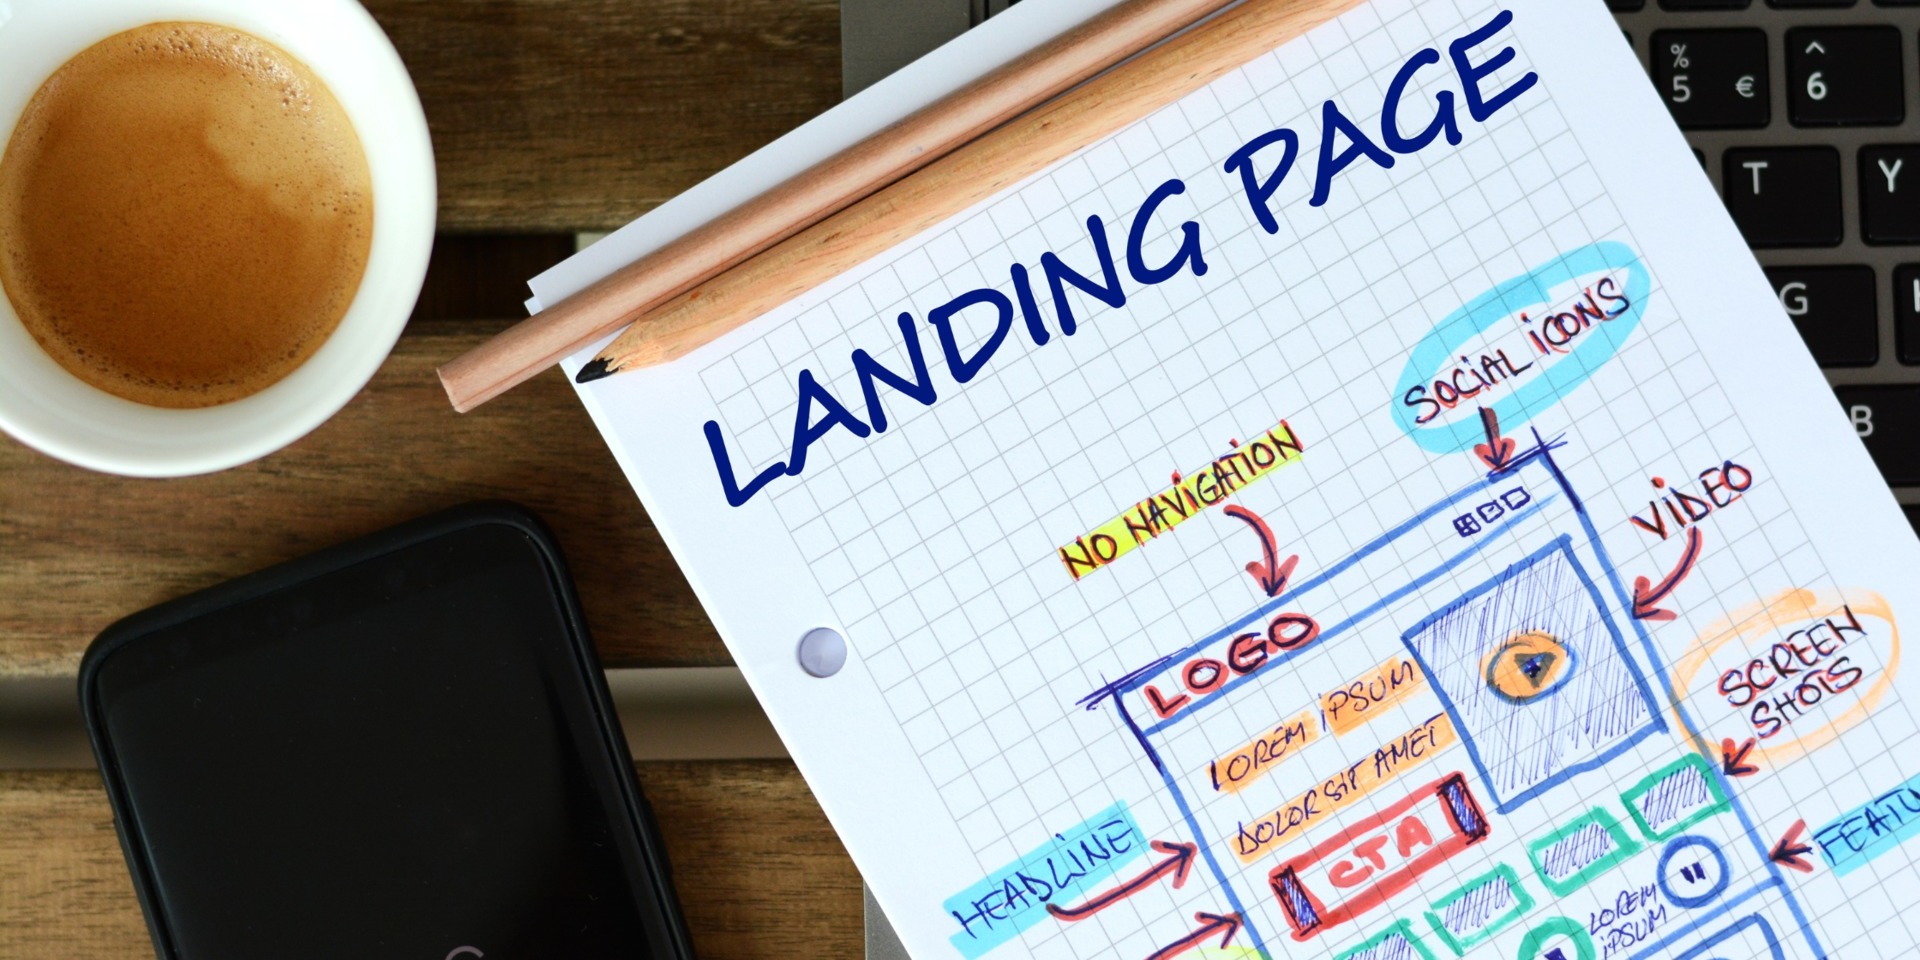 A landing page diagram on a notepad